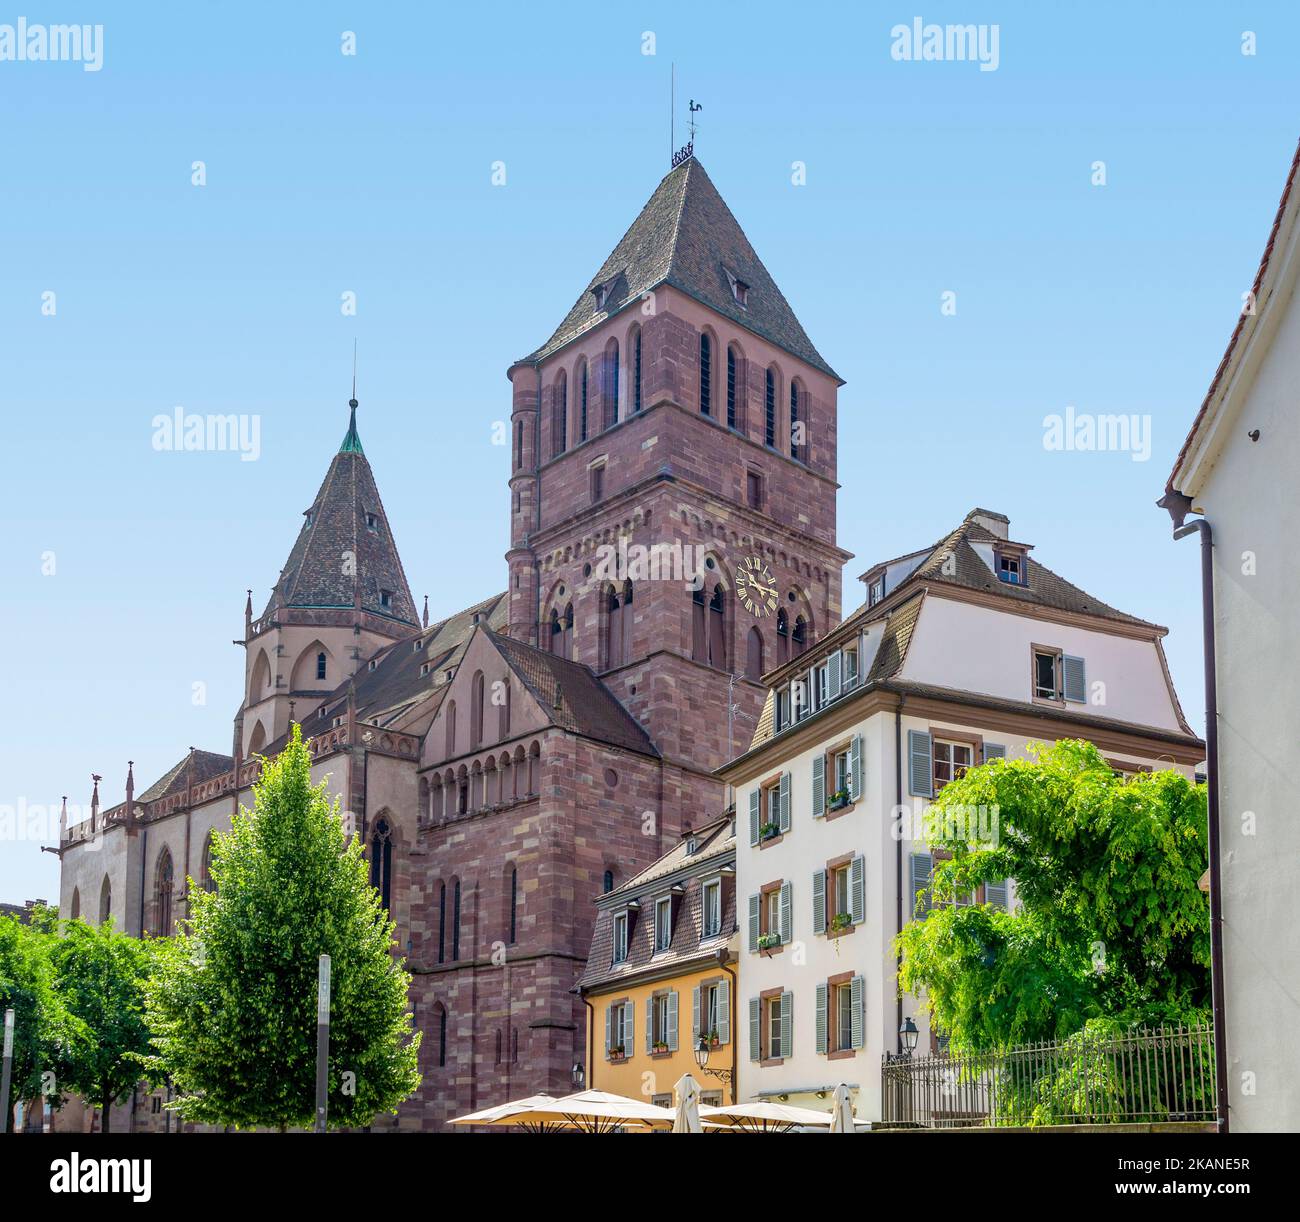 Idyllic impression around St Thomas Church in Strasbourg, a city at the Alsace region in France Stock Photo